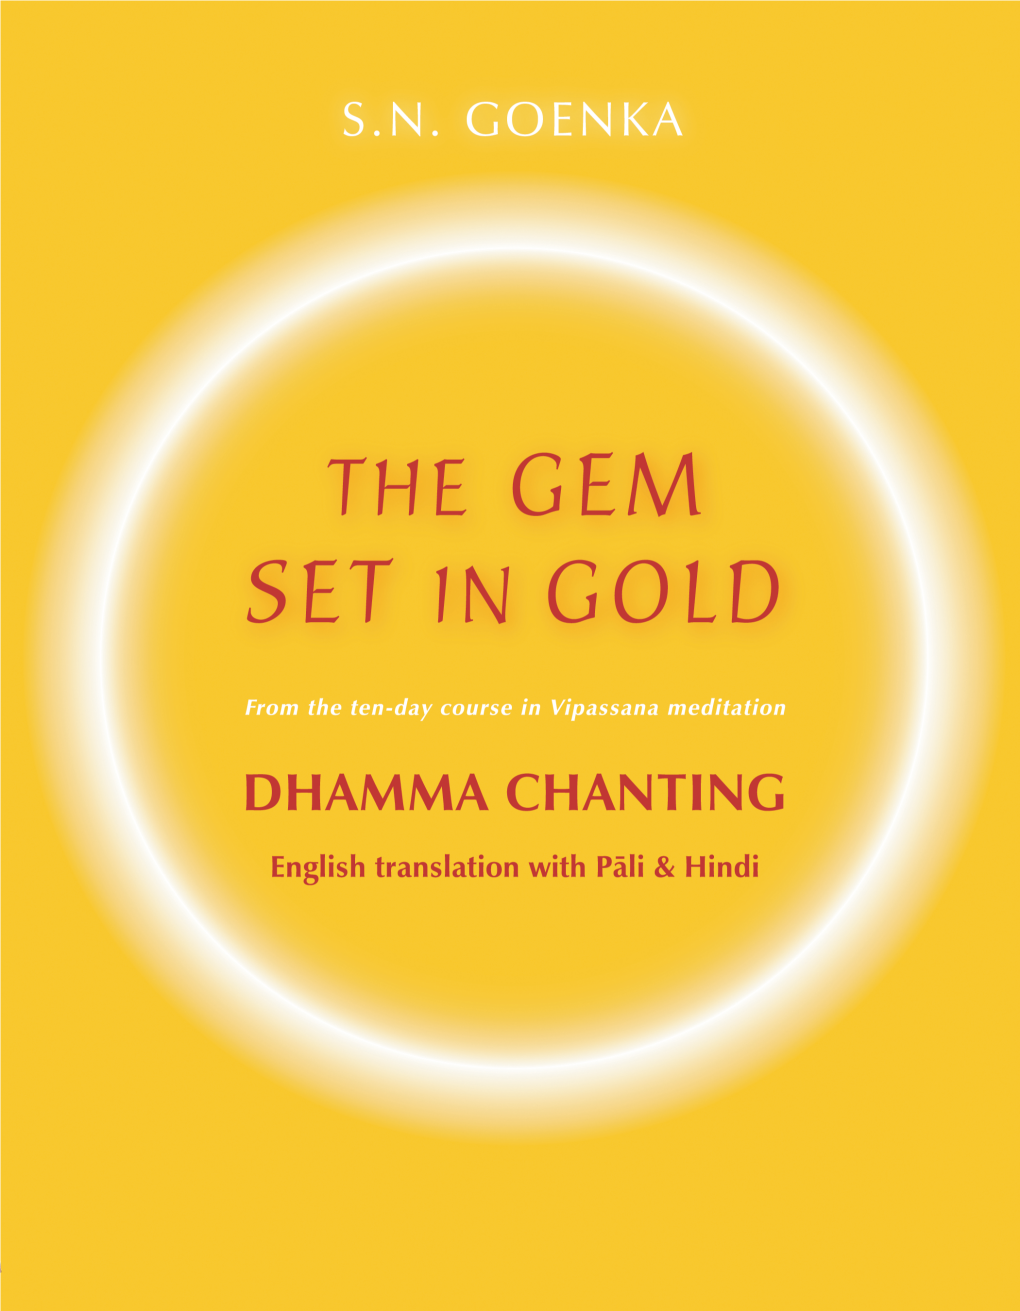 The Gem Set in Gold a Manual of Pariyatti Containing the P±Li and Hindi Chanting from a Ten-Day Course of Vipassana Meditation